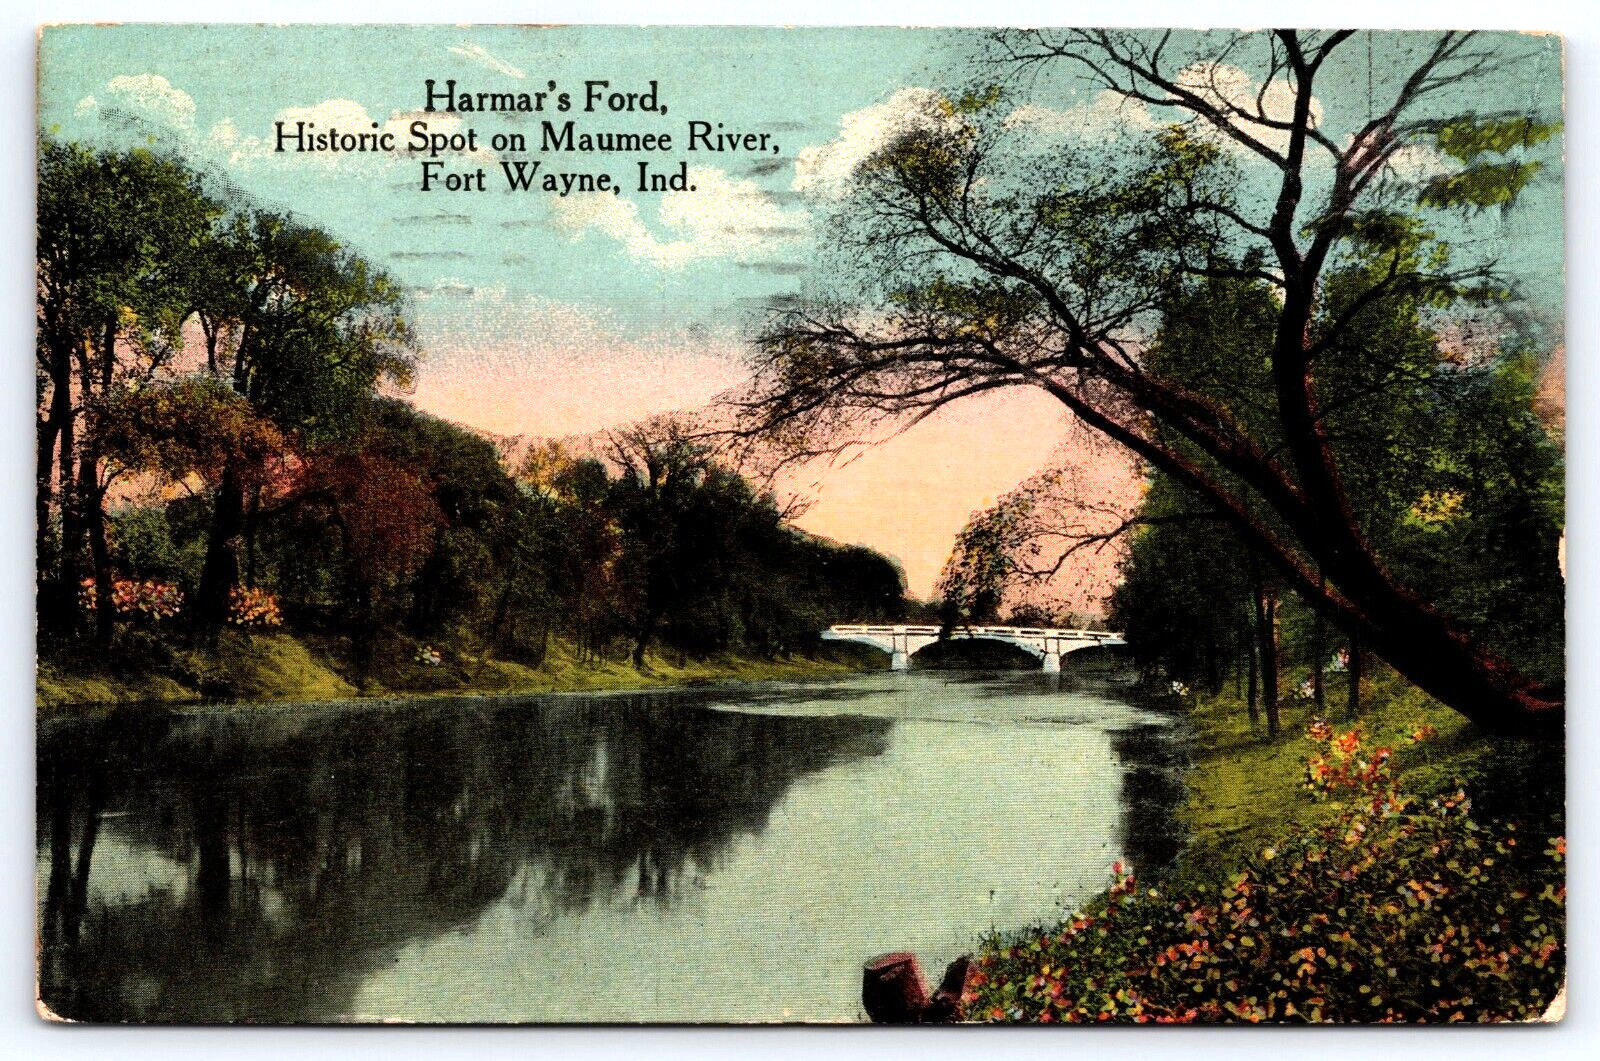 Fort Wayne, IN, Harmar's Ford, Maumee River, Antique, Vintage 1918 Postcard